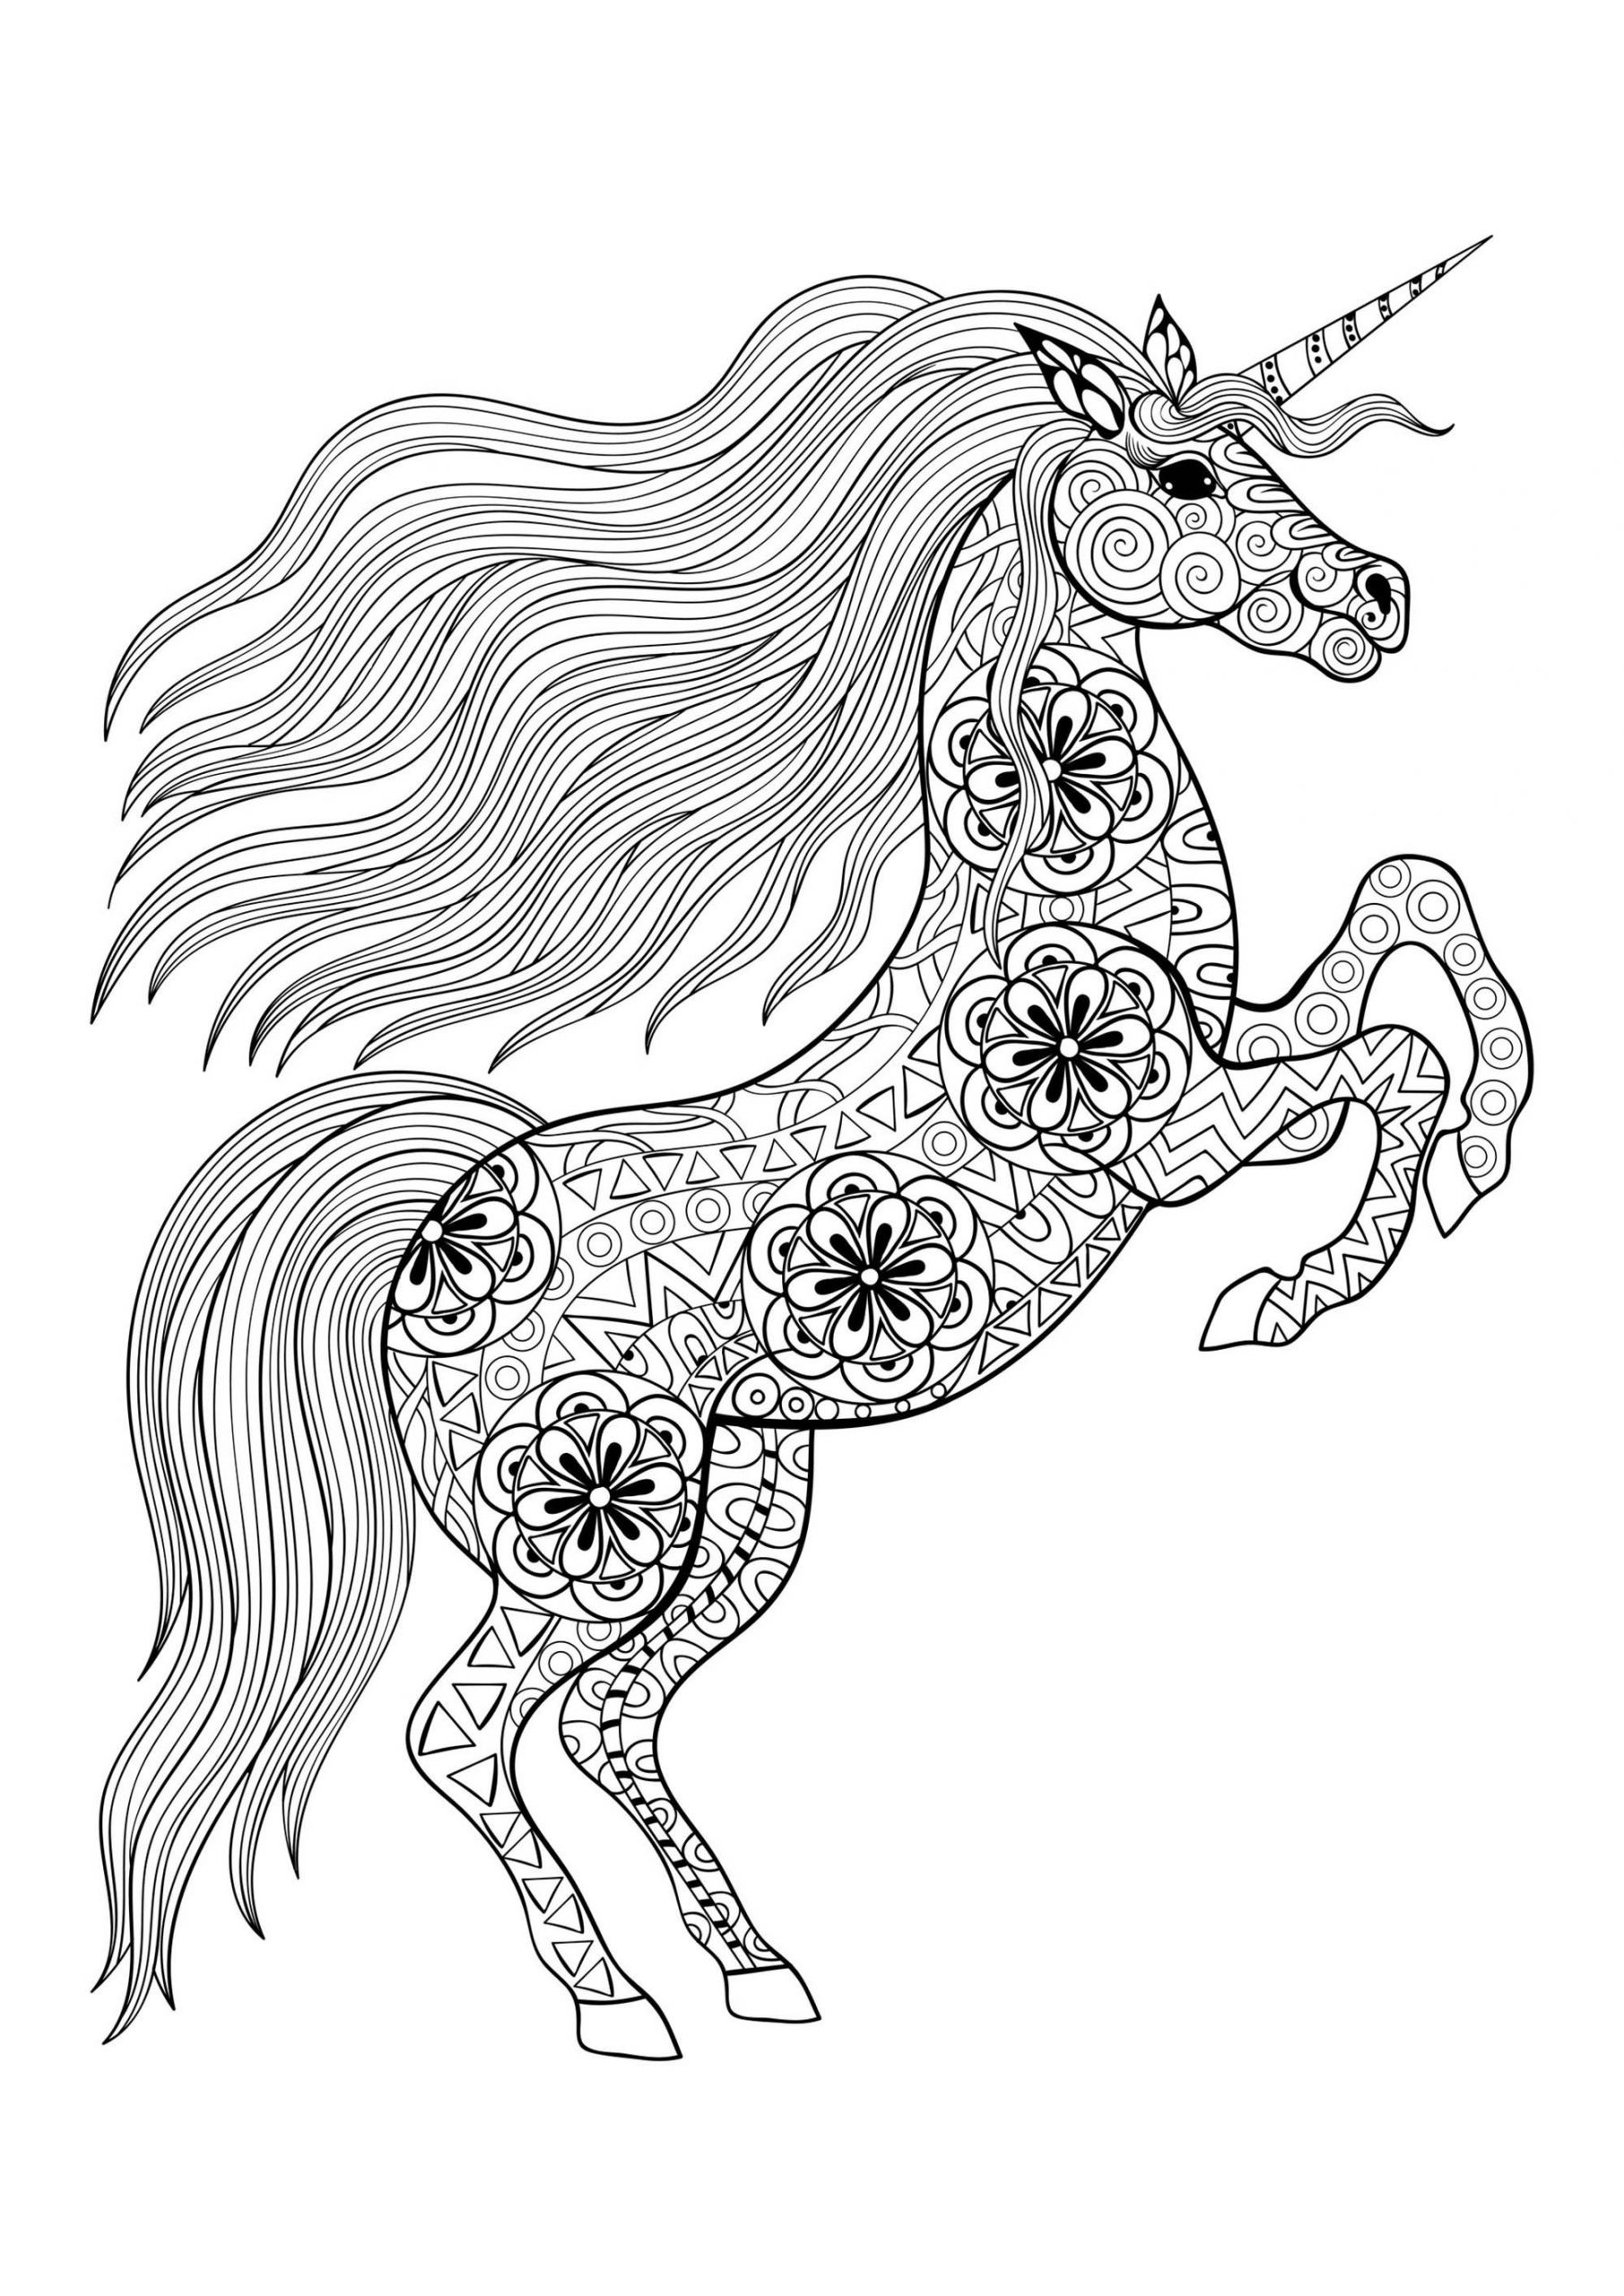 Unicorn Adult Coloring Book
 Unicorn on its two back legs Unicorns Adult Coloring Pages